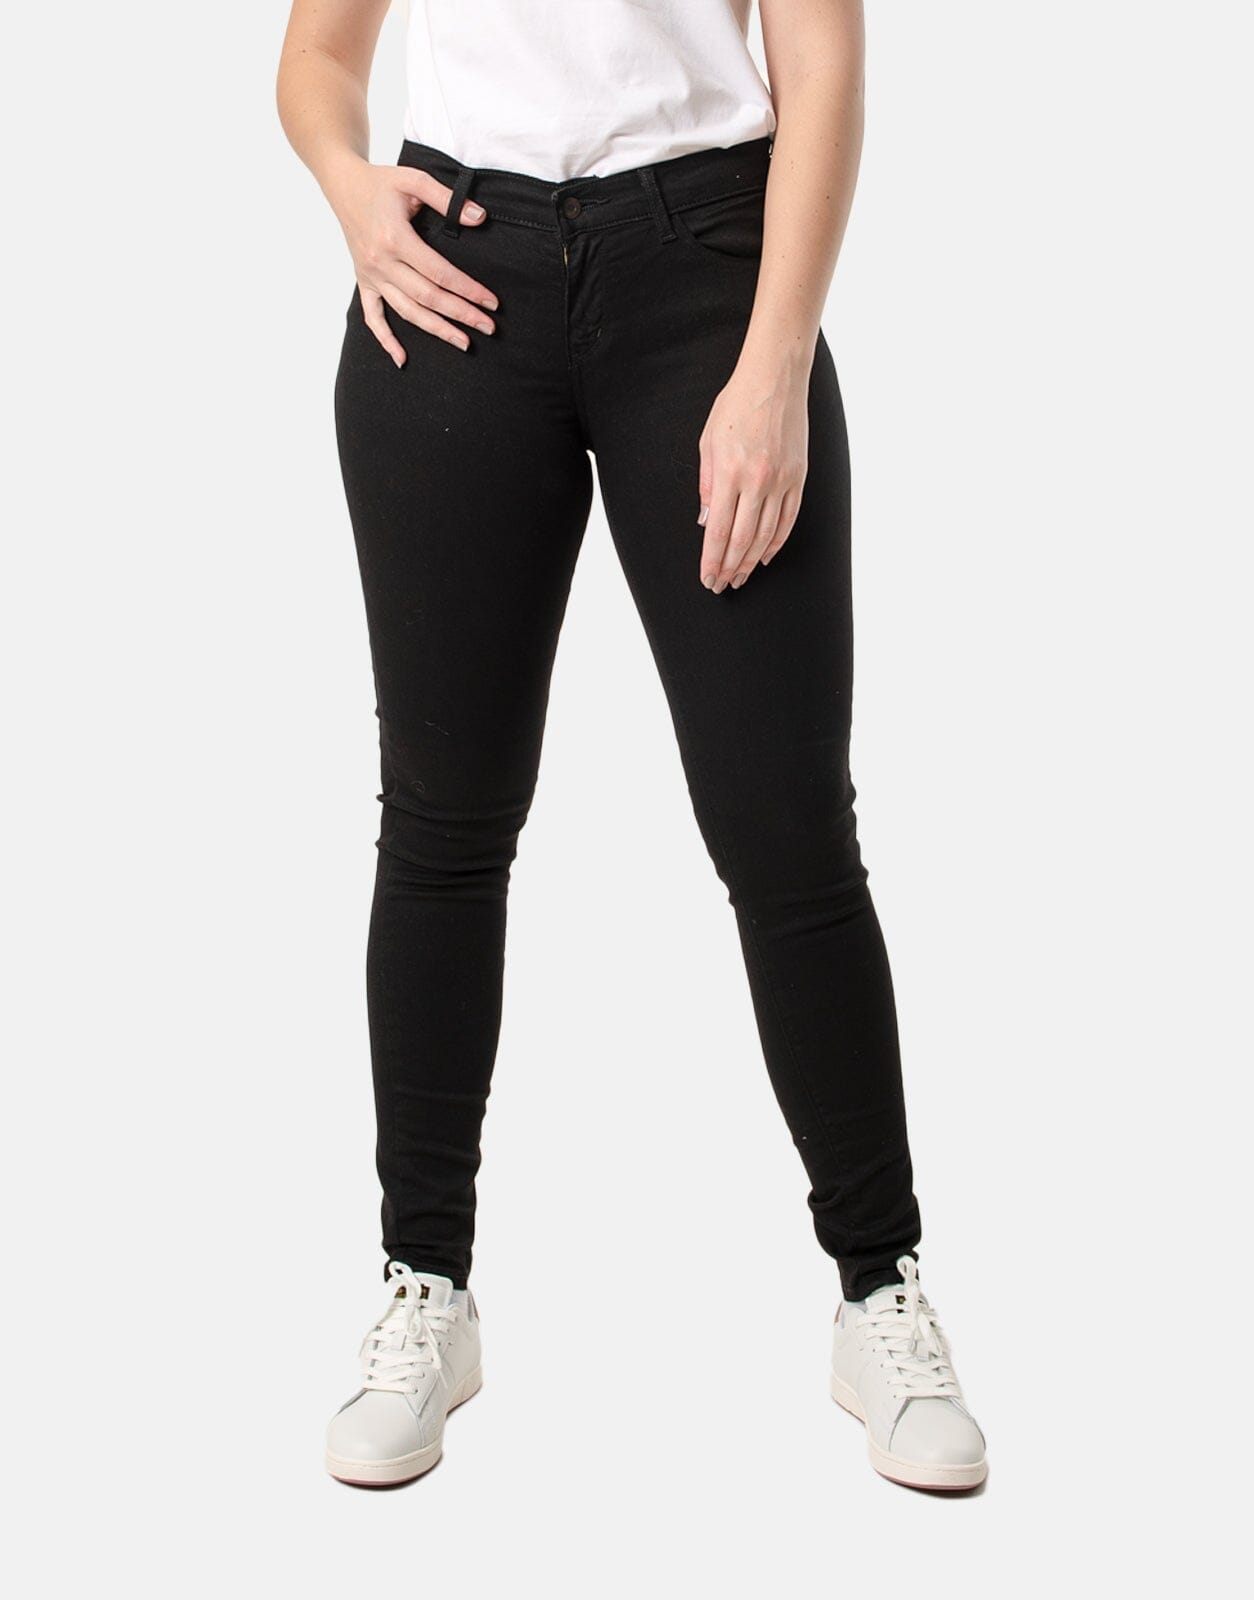 Levi's 710 Super Skinny Secluded Echo Jeans - Subwear